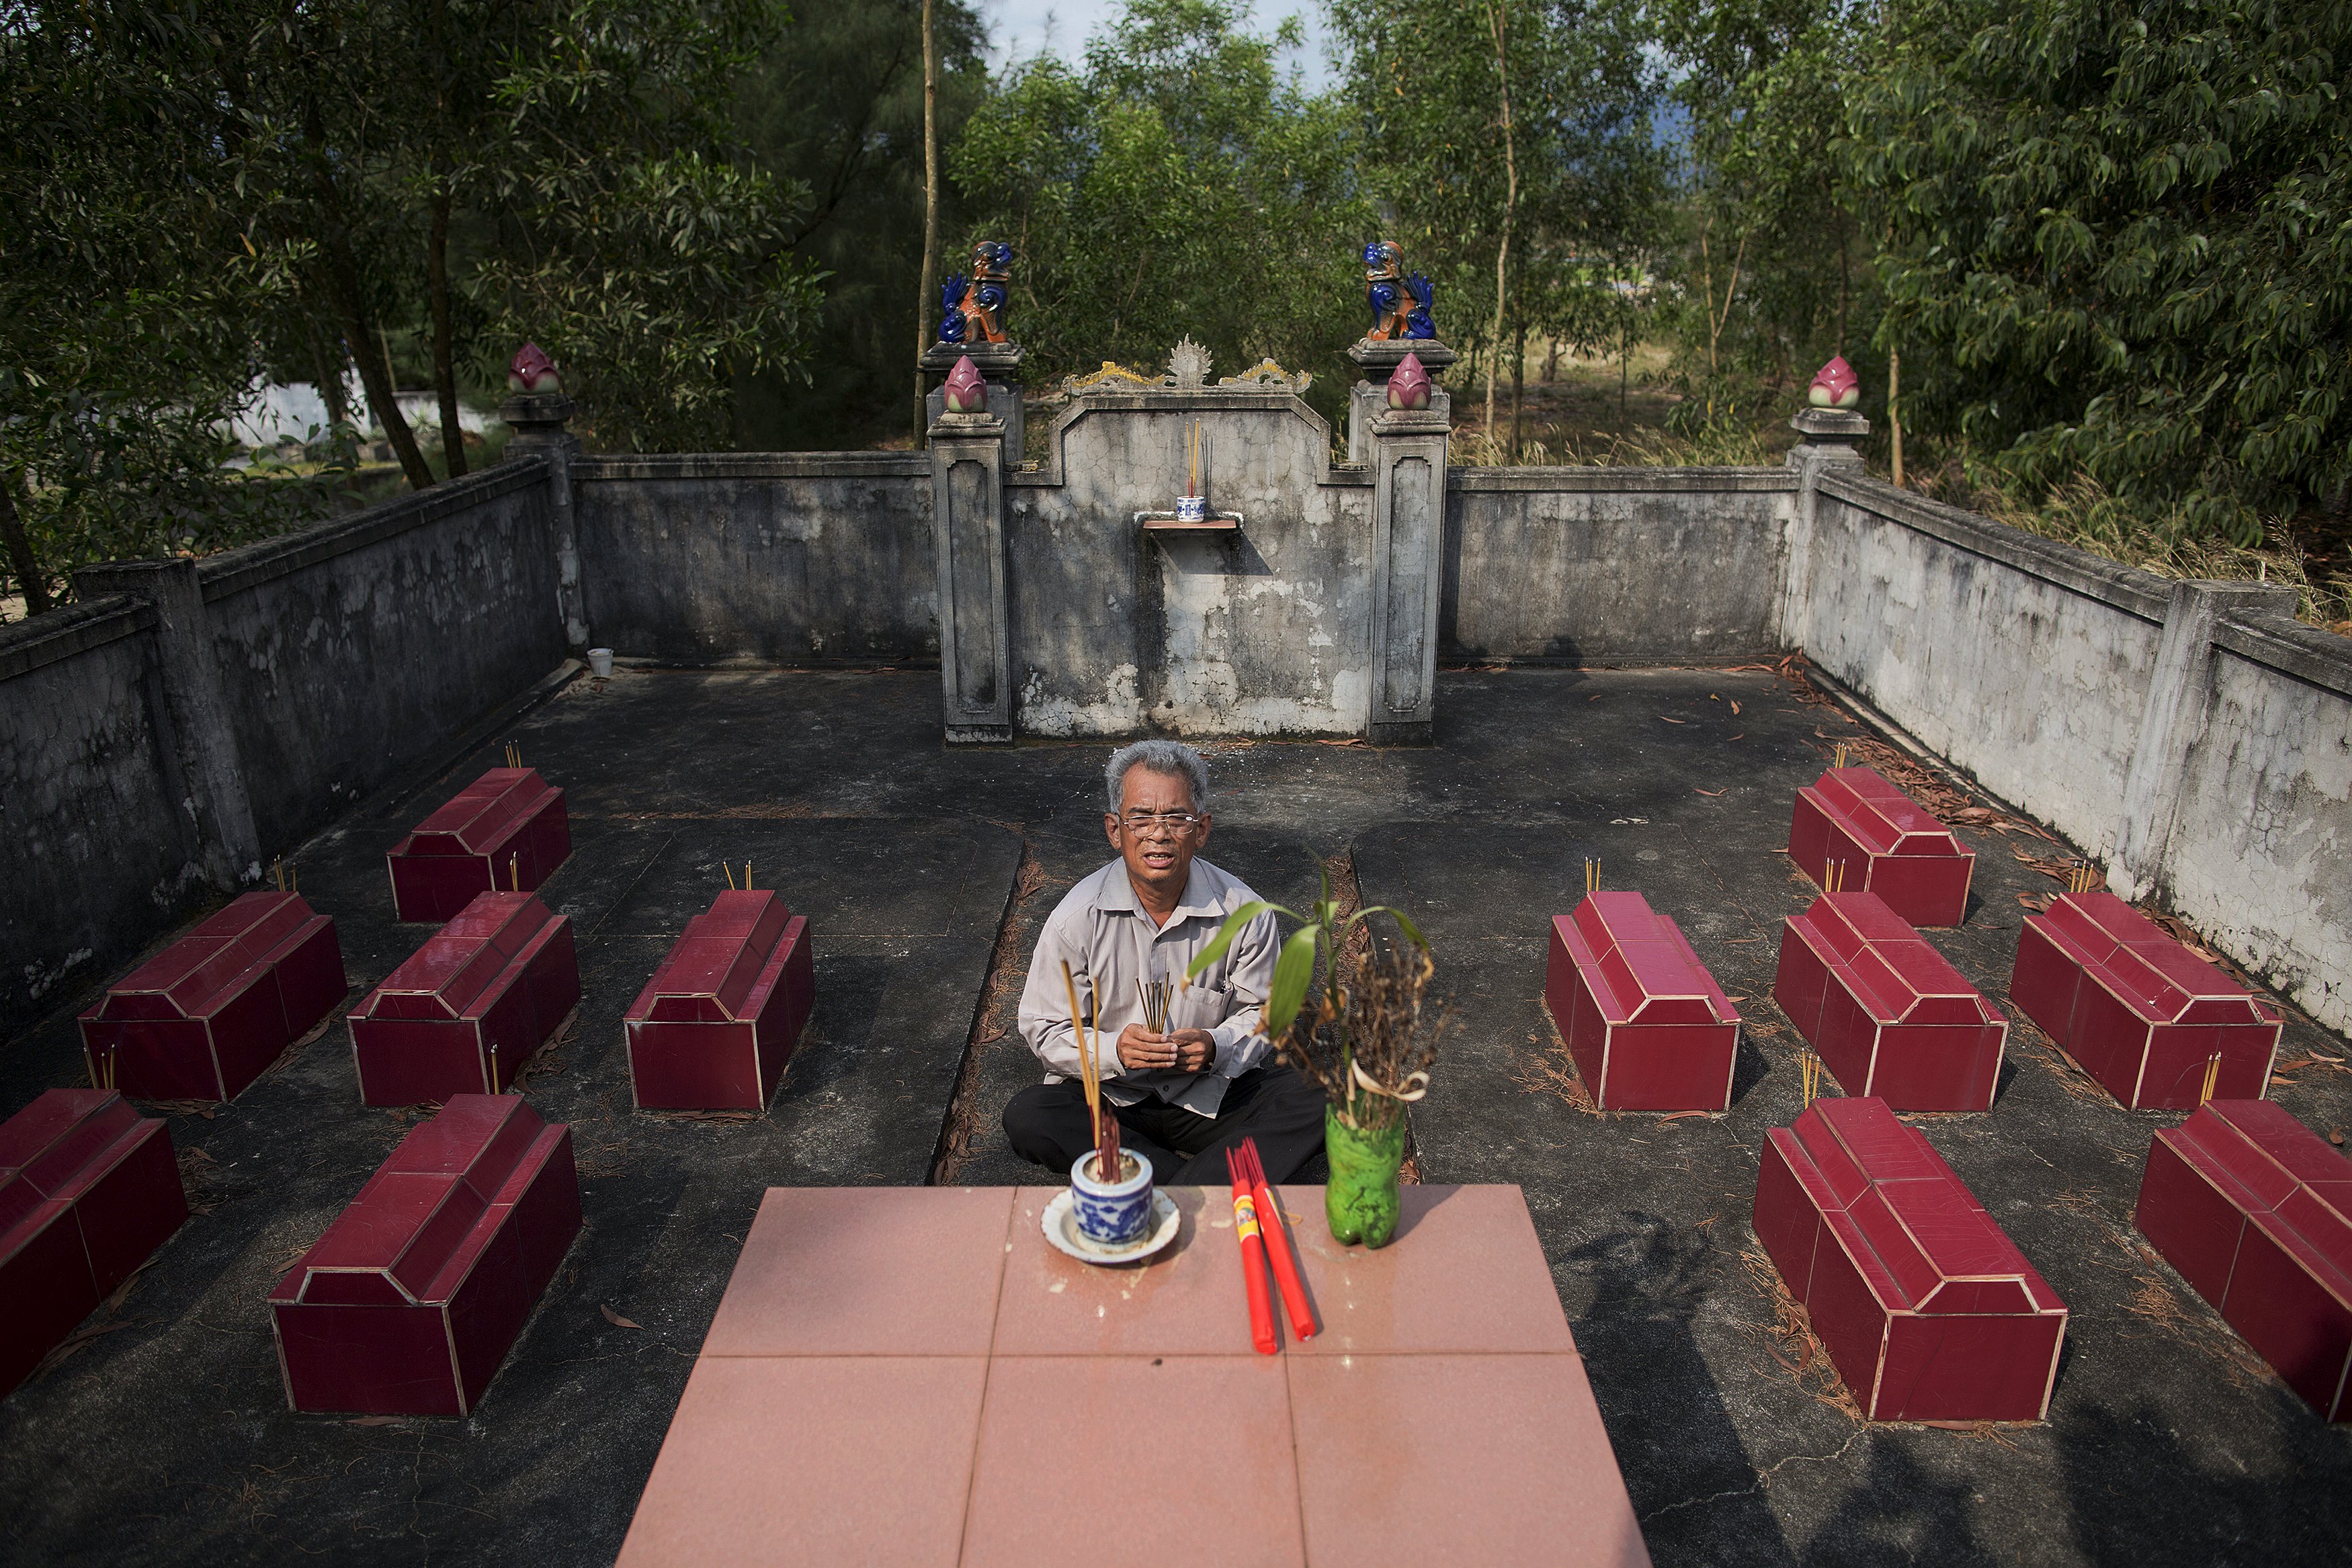 Former soldier Do Duc Diu prays at the cemetery where twelve of his children are buried, after showing the graves to reporters, near his house in Quang Binh Province in central Vietnam April 11, 2015. Twelve of his fifteen children died from illnesses that the family and their doctors link to Do Duc Diu's exposure to Agent Orange. Do Duc Diu served as a Vietnamese soldier from the North in the early 70s in areas that were heavily contaminated by Agent Orange. He only found out about the possible dangers of Agent Orange before his last child was born in 1994. He said that if he had known about the possible effects of Agent Orange he would not have had children. Before he found out about the effects of Agent Orange, Do Duc Diu said that he and his wife visited many spiritual leaders and prayed at different shrines as they attributed their children's sickness to their ill-fated destiny.